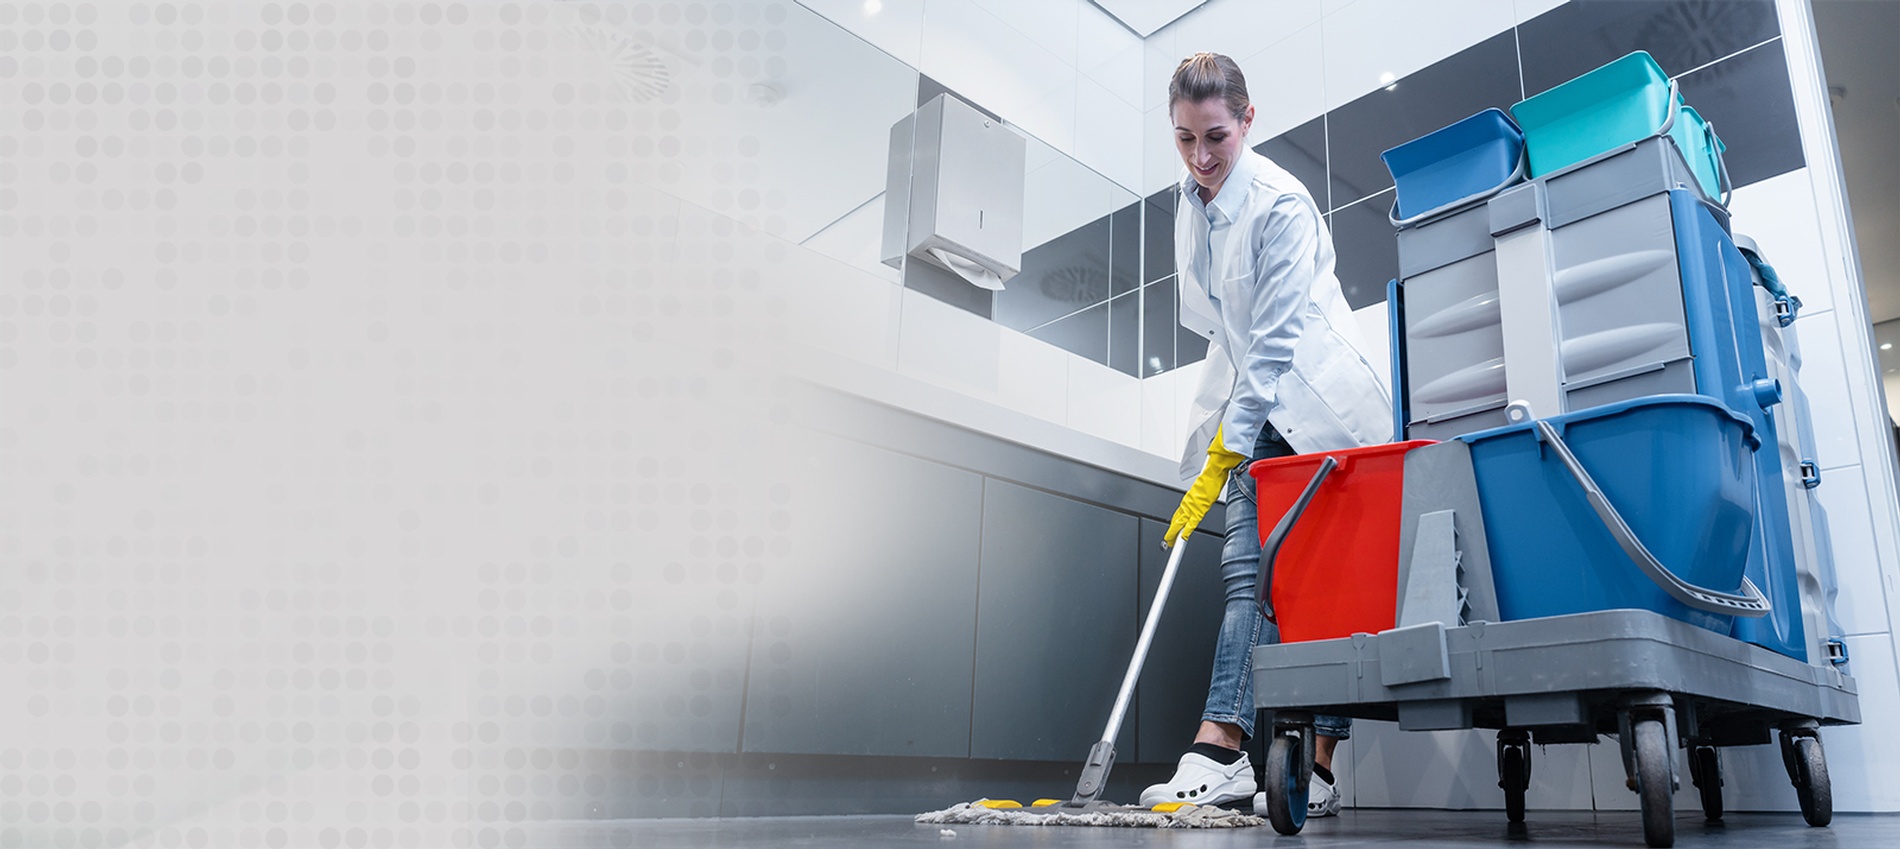 Our Cleaning professionals offer Commercial Building Cleaning Services that give a lustrous look to your business space